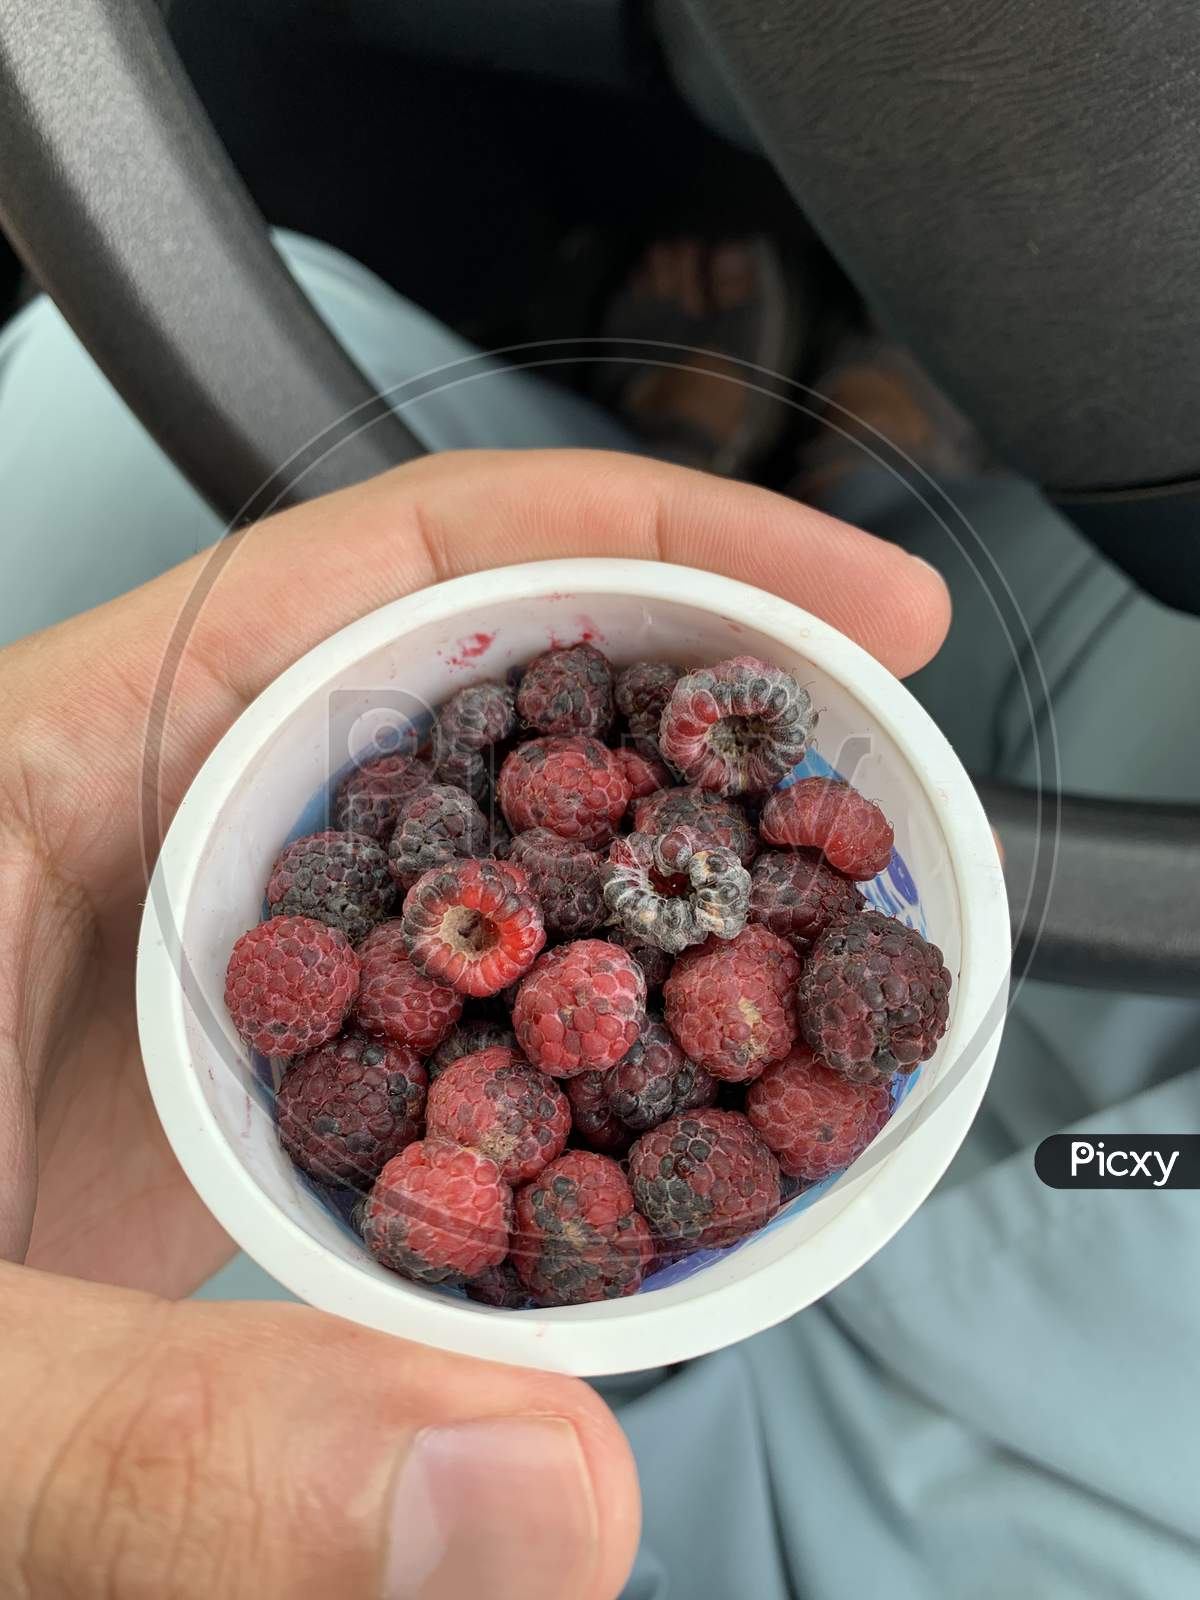 Red And Black Berries In The Plastic Cup Held In Hand